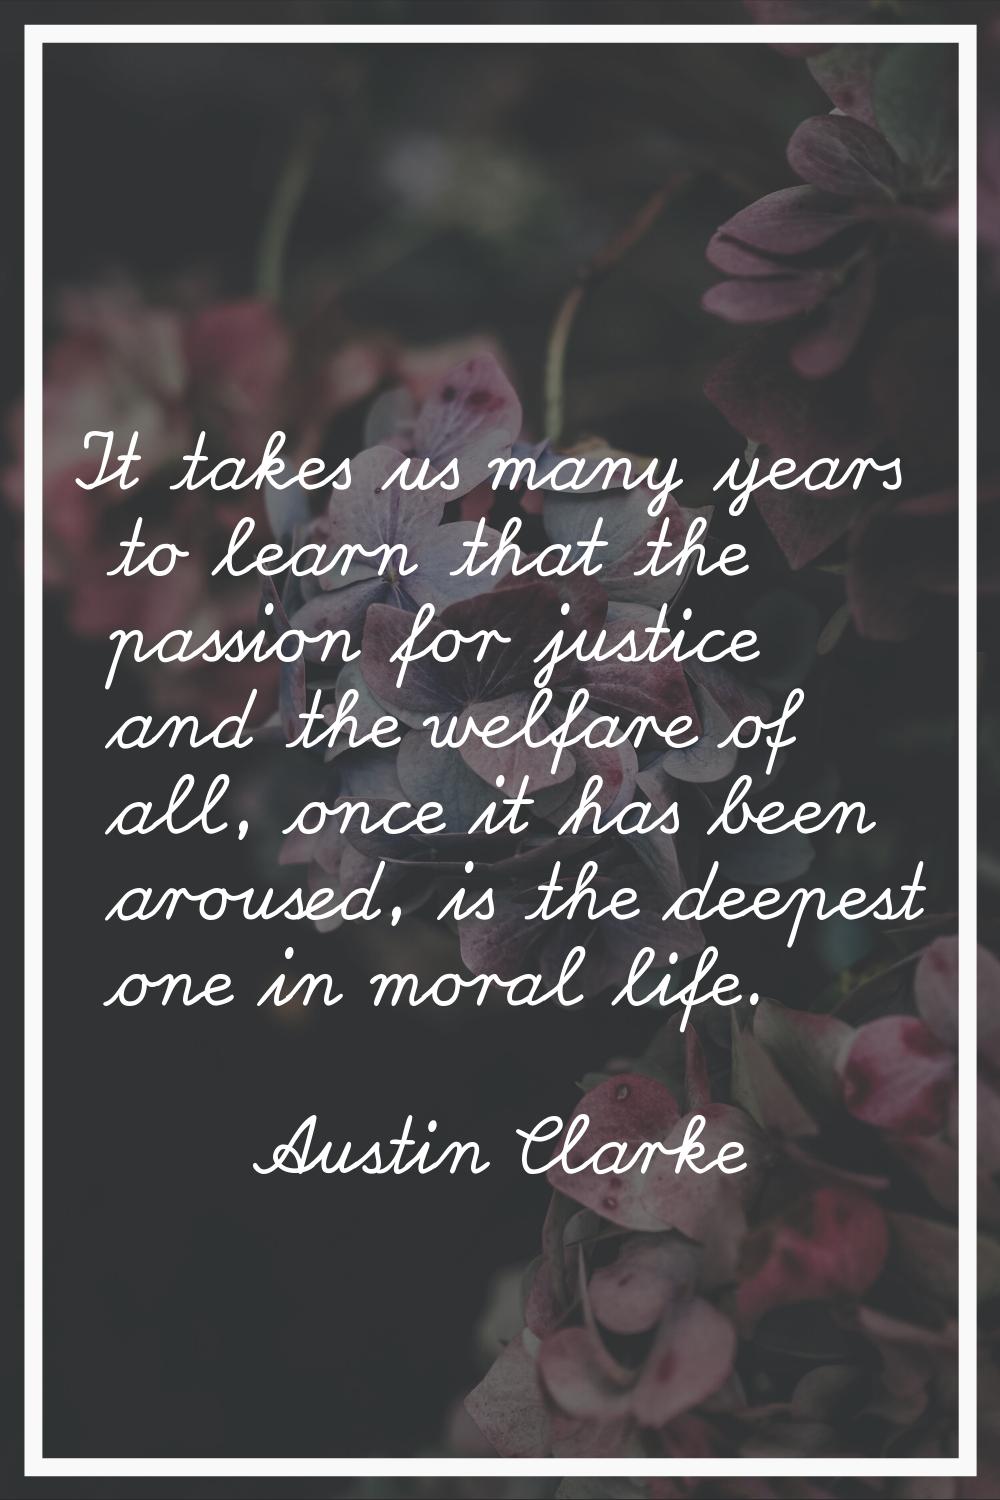 It takes us many years to learn that the passion for justice and the welfare of all, once it has be